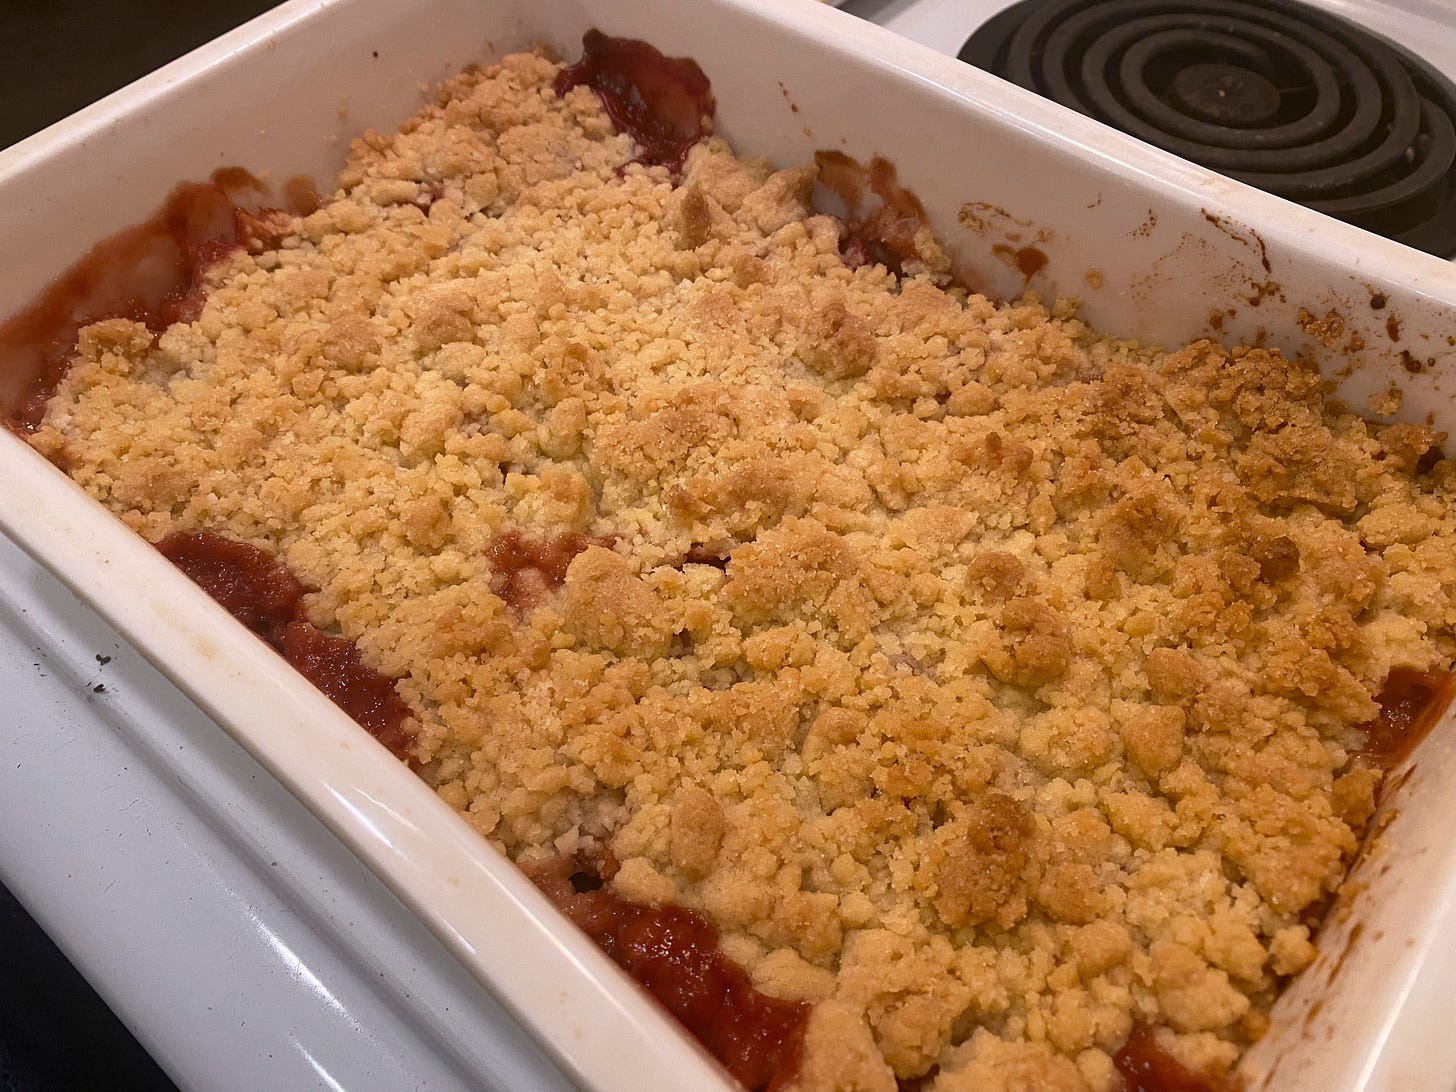 a rectangular white baking dish with a golden-brown crumble in it. Pinkish juices have bubbled up at the edges.